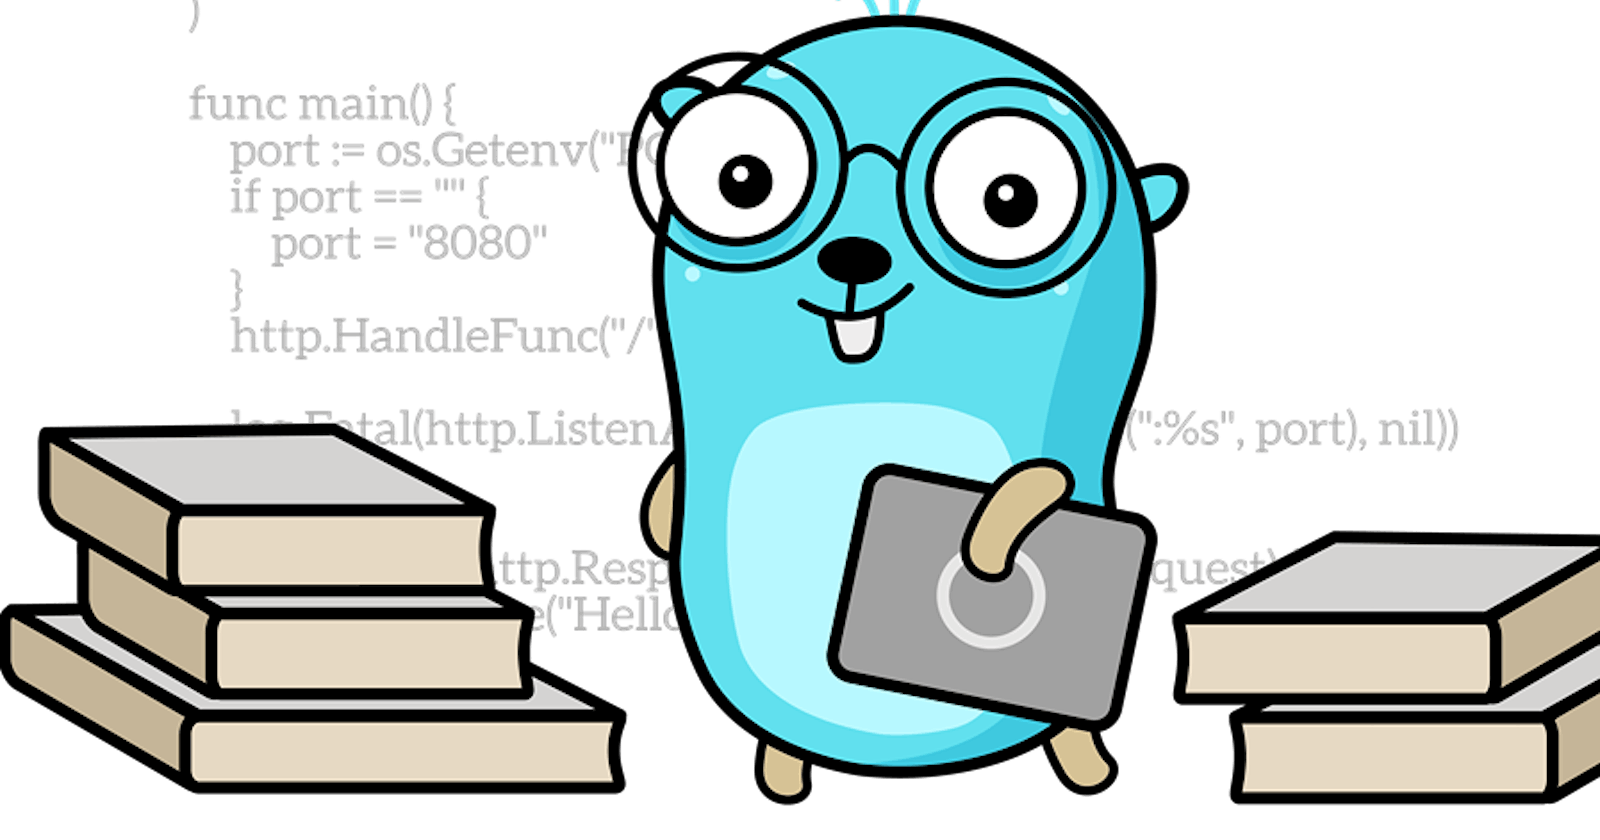 Integration Test in Golang: Testcontainer and Localstack